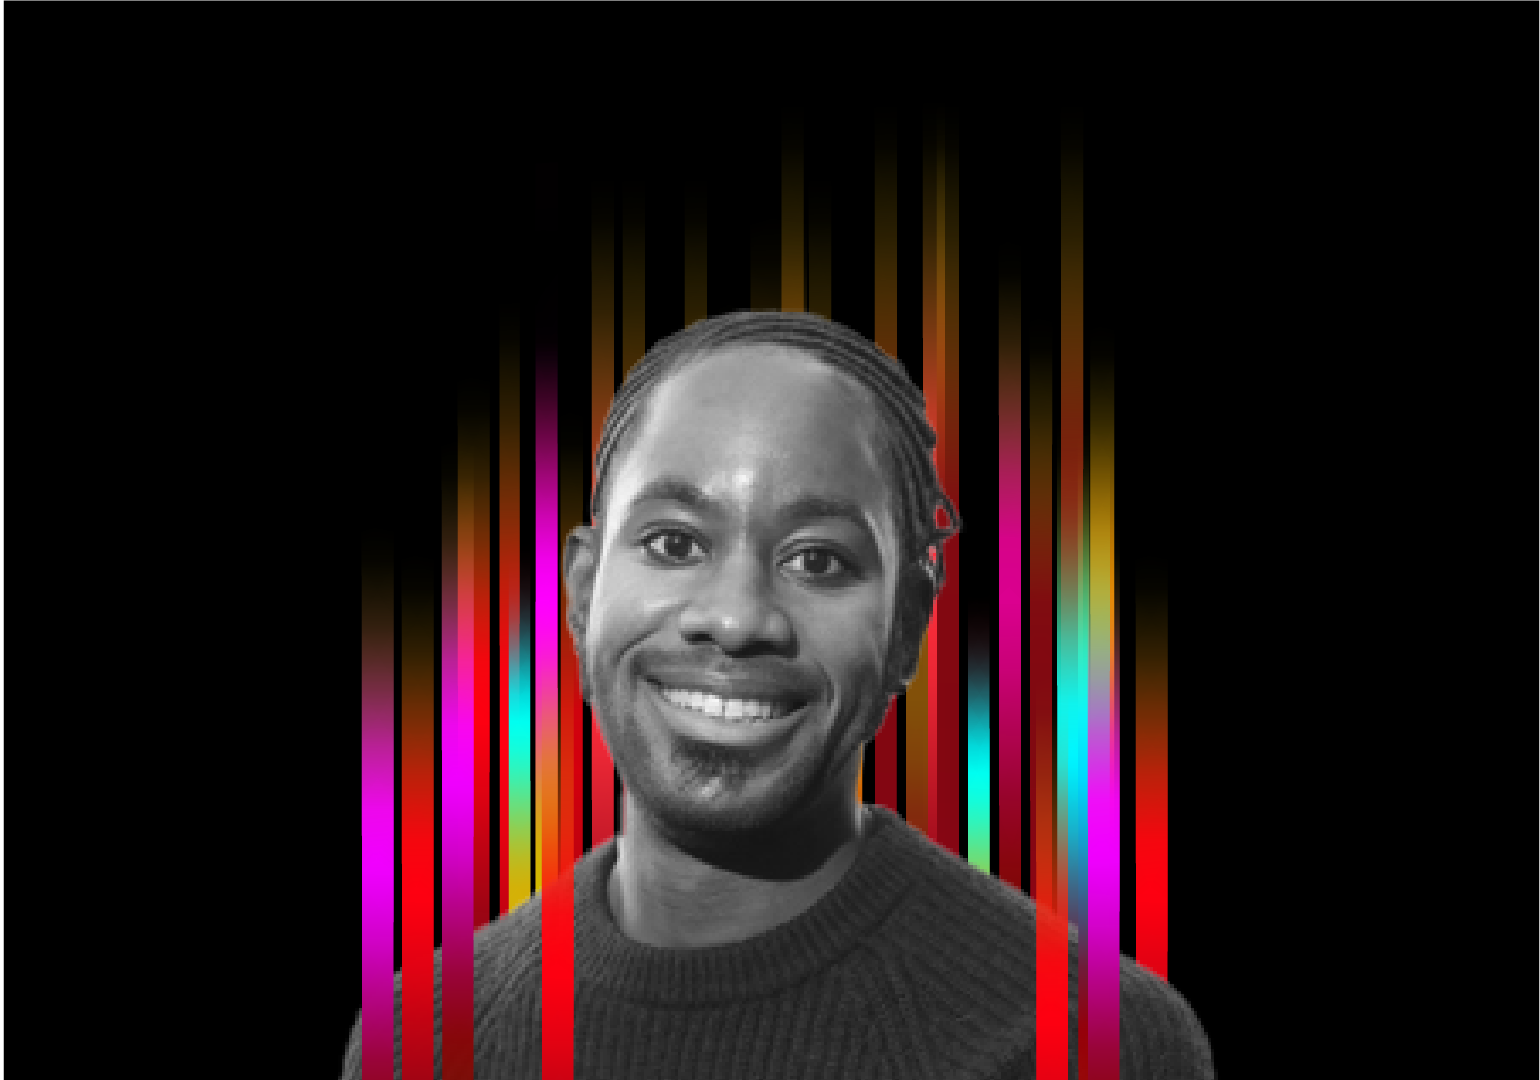 On the middle of a black background is a row of colourful vertical stripes’. In the centre is a black and white profile photo of TEDx speaker Jason Ardey superimposed on top.